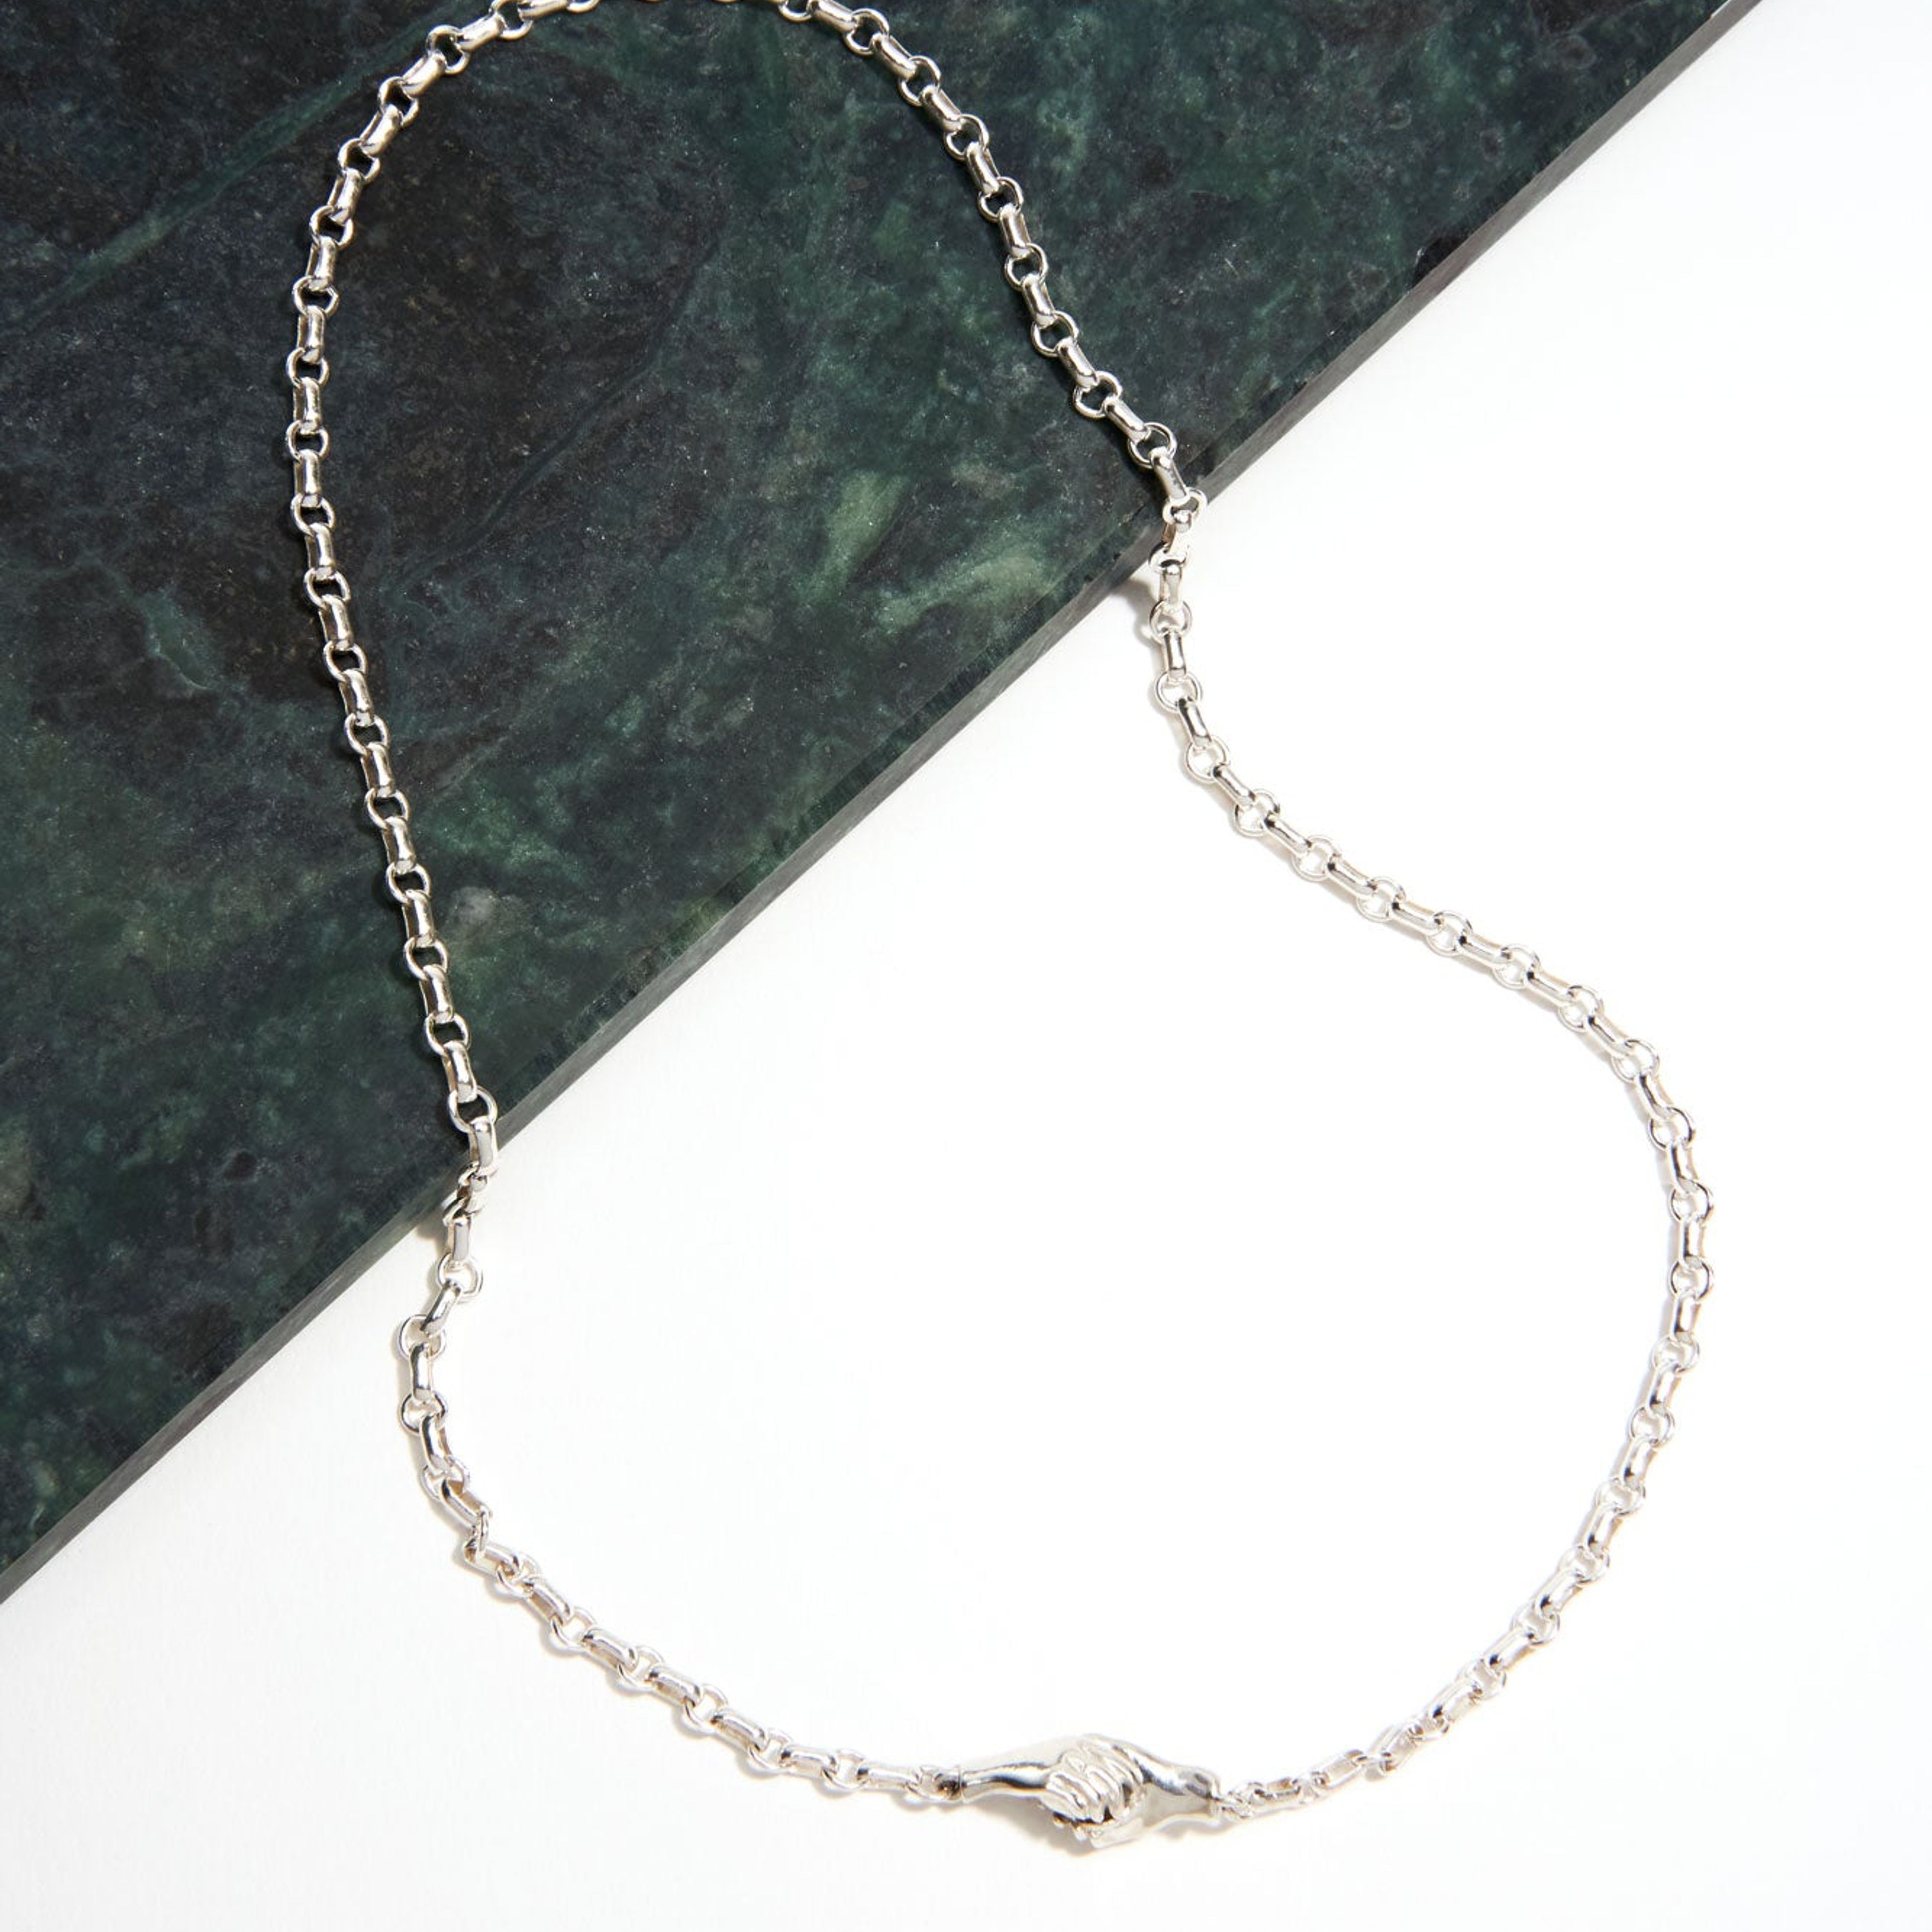 Fine Gentlewoman's Agreement Necklace in Sterling Silver